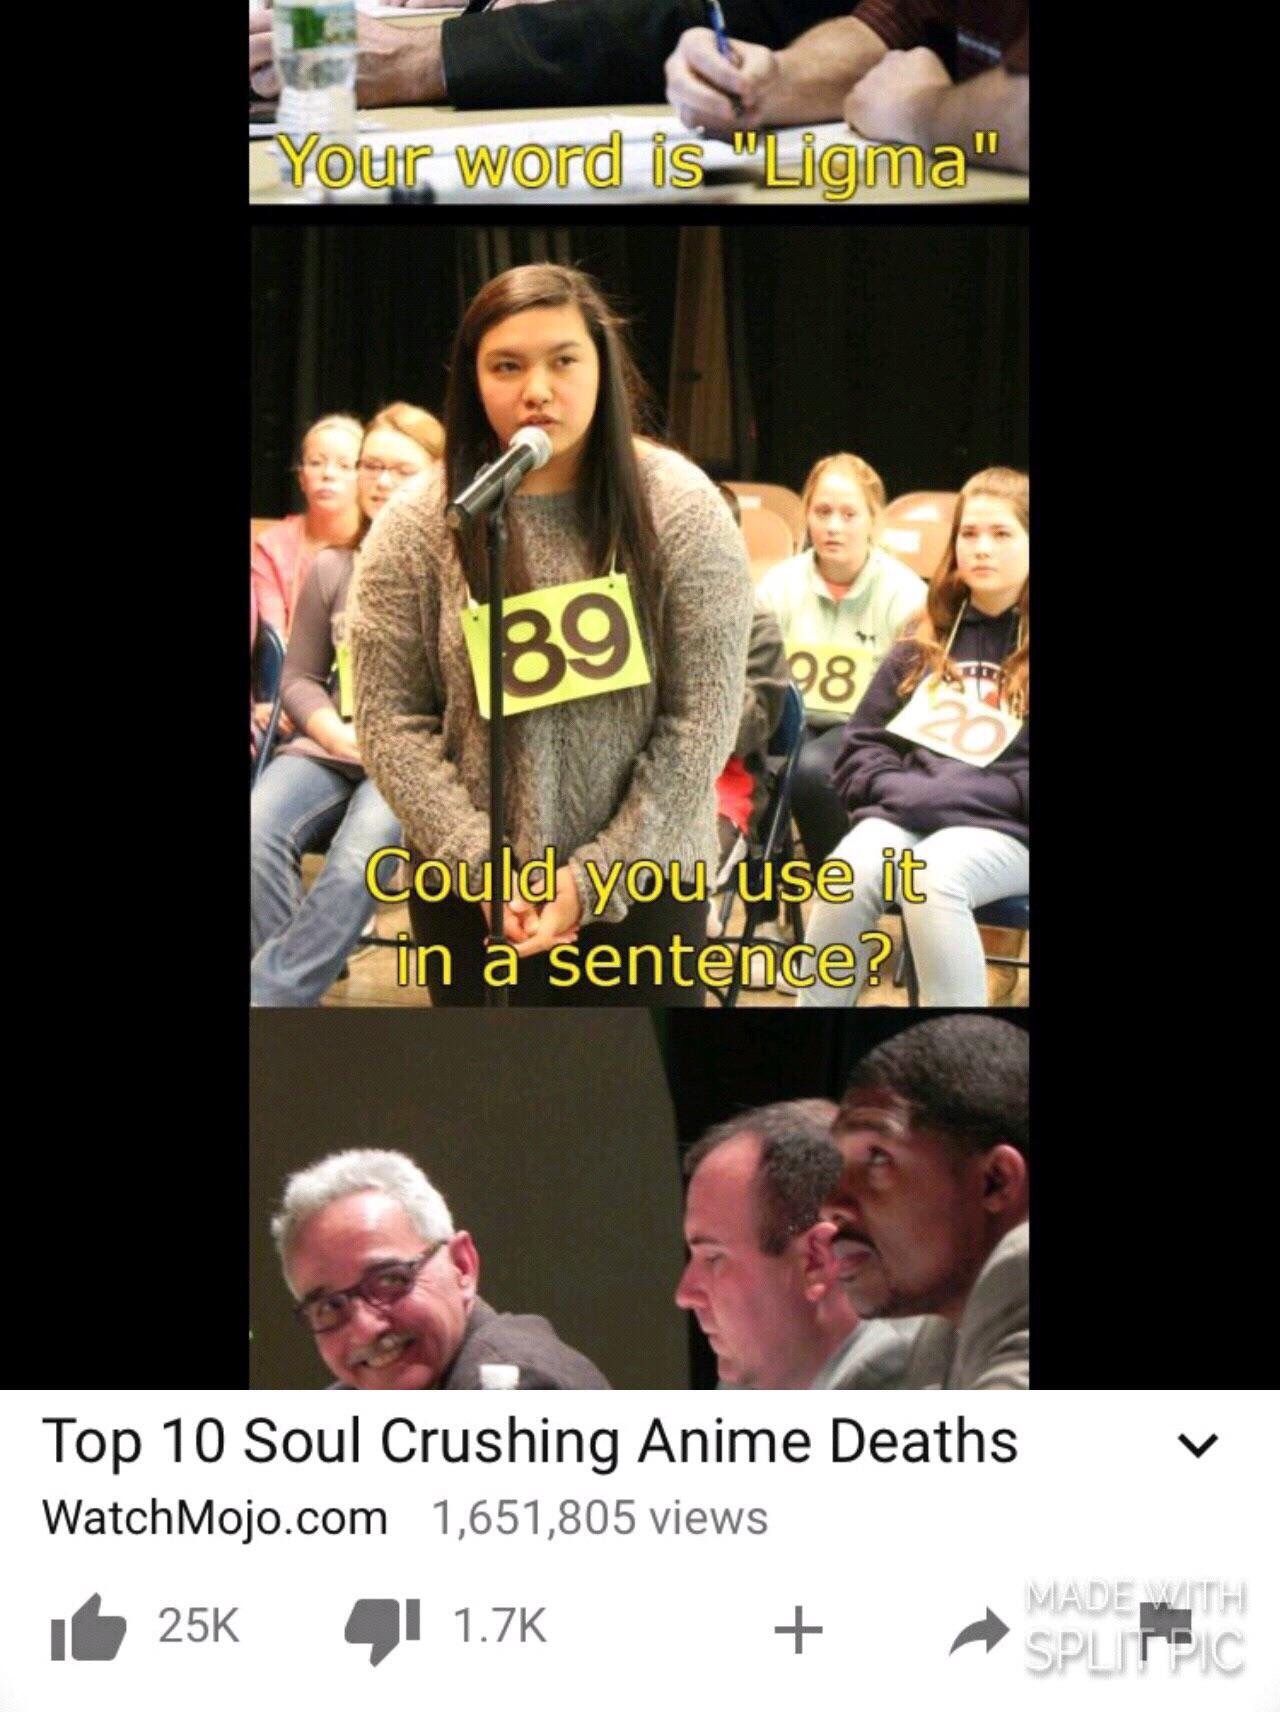 memes - ligma spelling bee meme - Fyour word is "Ligma" Could you use it in a sentence? Top 10 Soul Crushing Anime Deaths WatchMojo.com 1,651,805 views Ib 25K 4 A